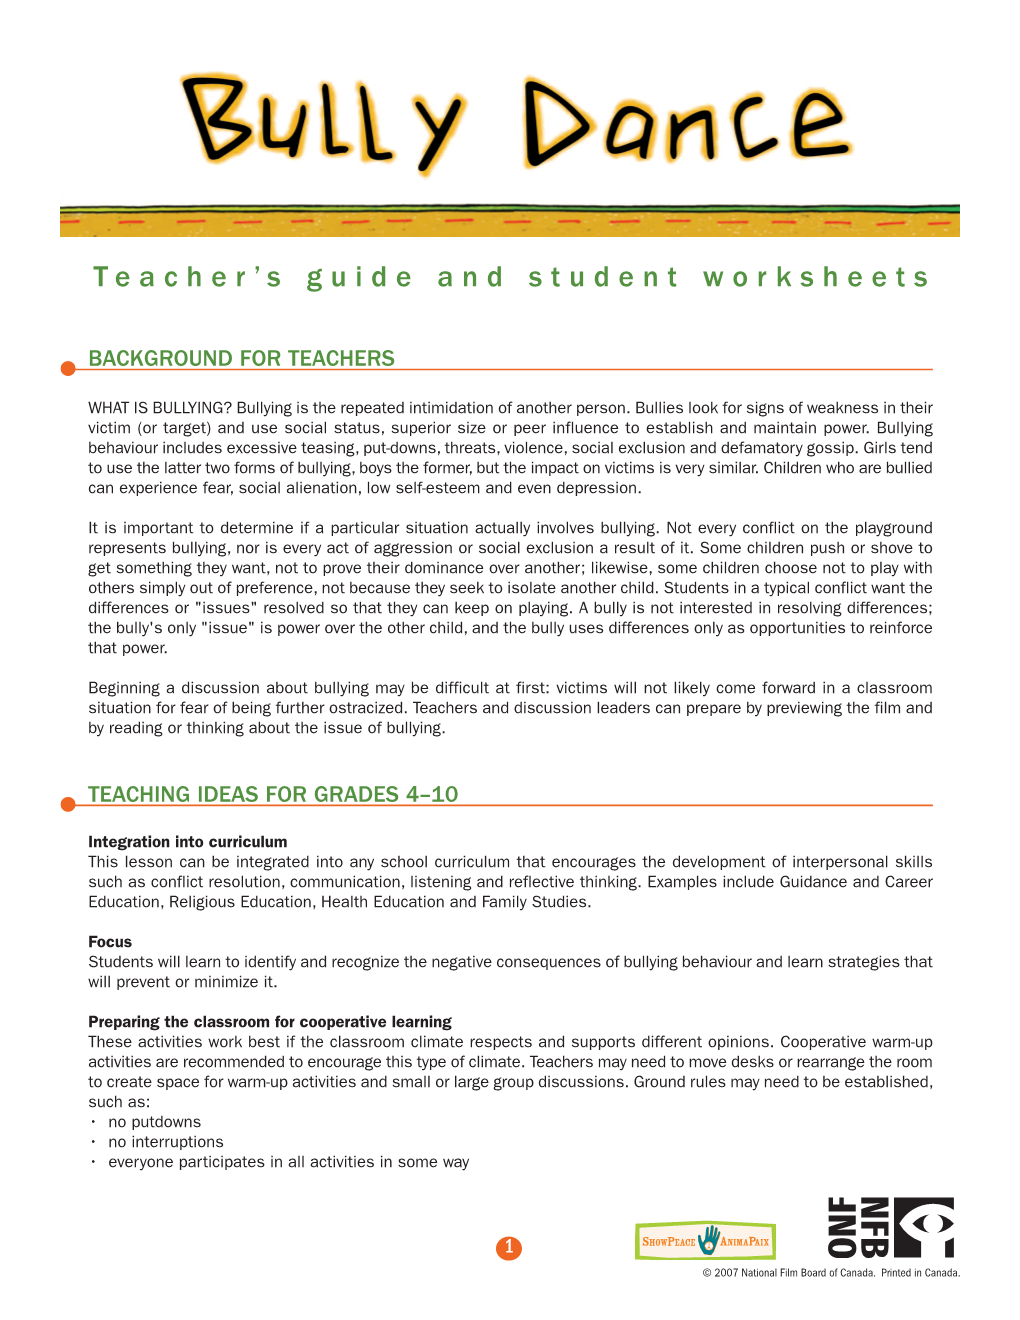 Teacher's Guide and Student Worksheets